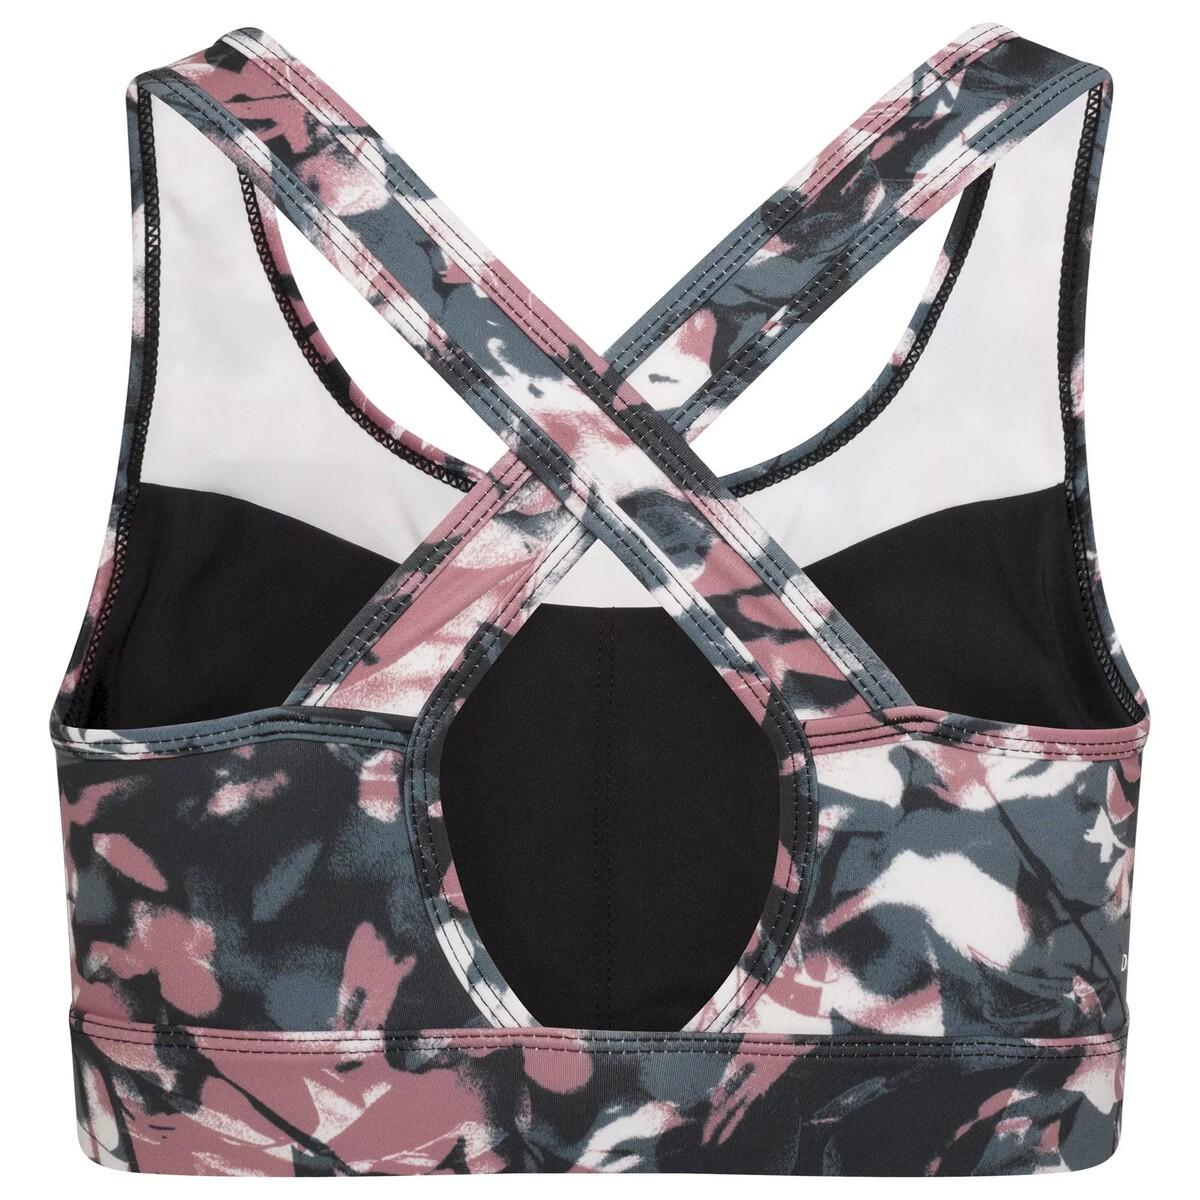 Womens/Ladies Mantra Laura Whitmore Floral Recycled Sports Bra (Mesa Rose) 2/5